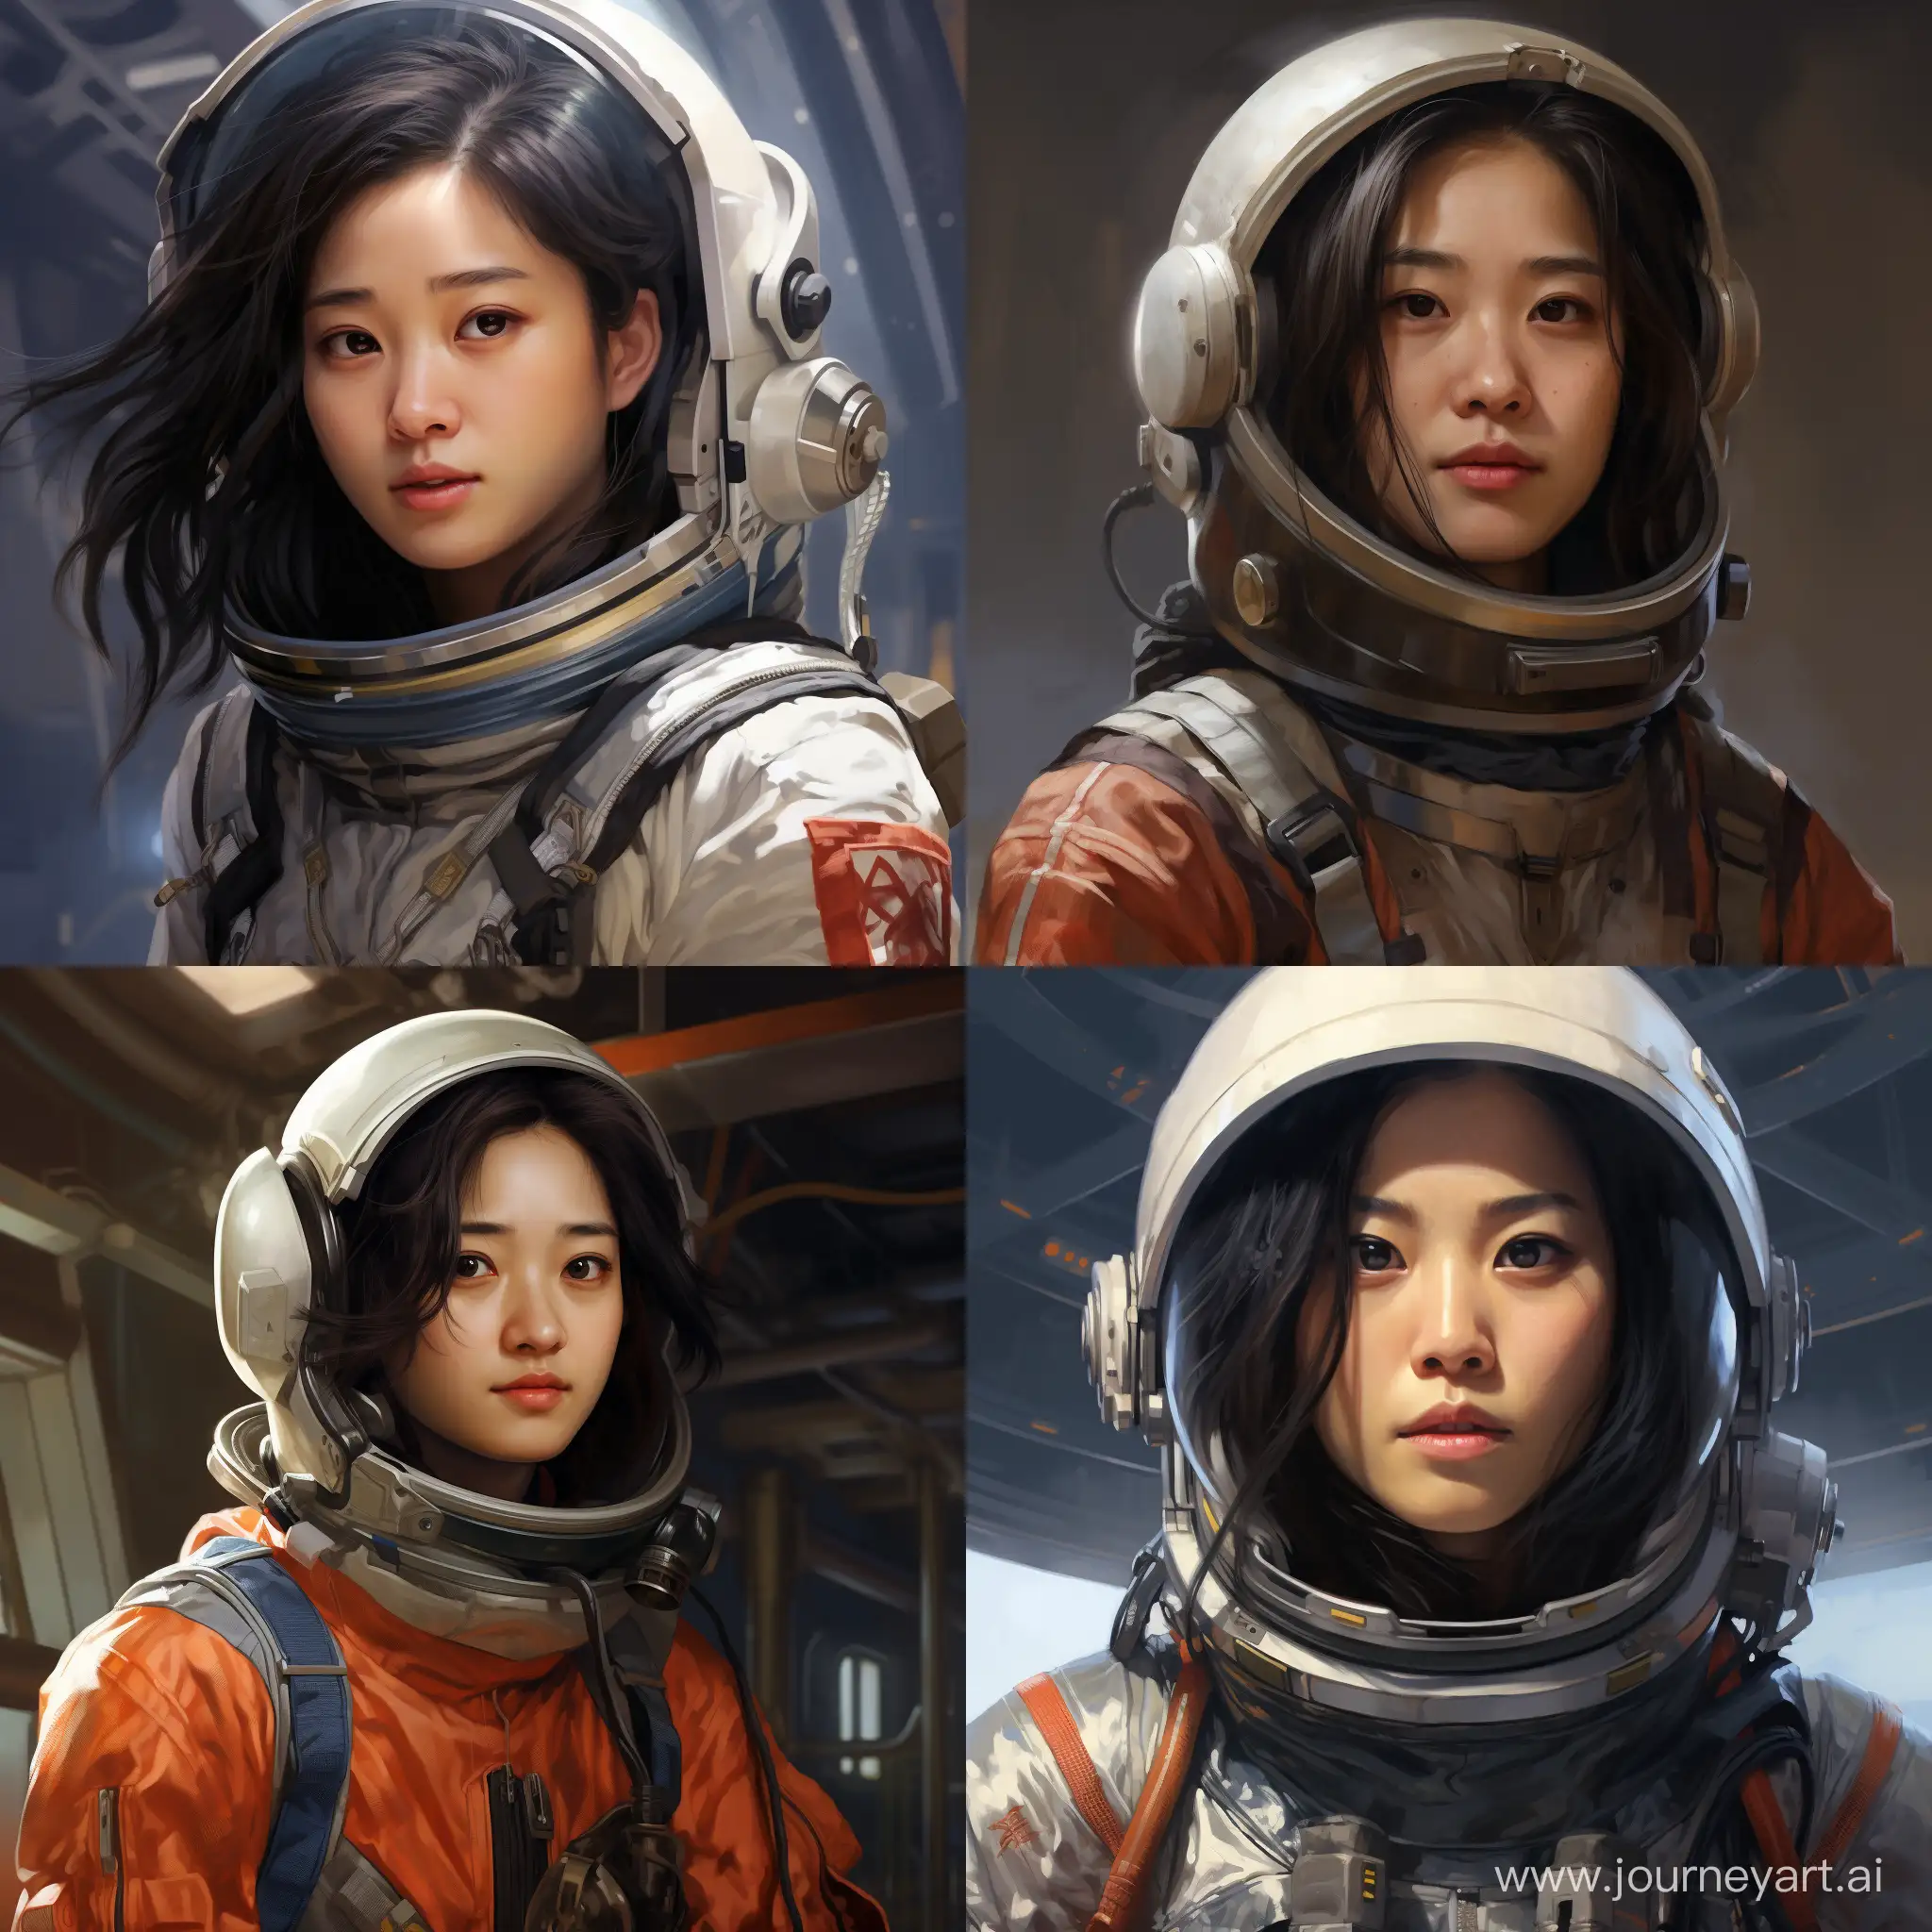 Realistic-Portrait-of-Chinese-Female-Astronaut-in-11-Aspect-Ratio